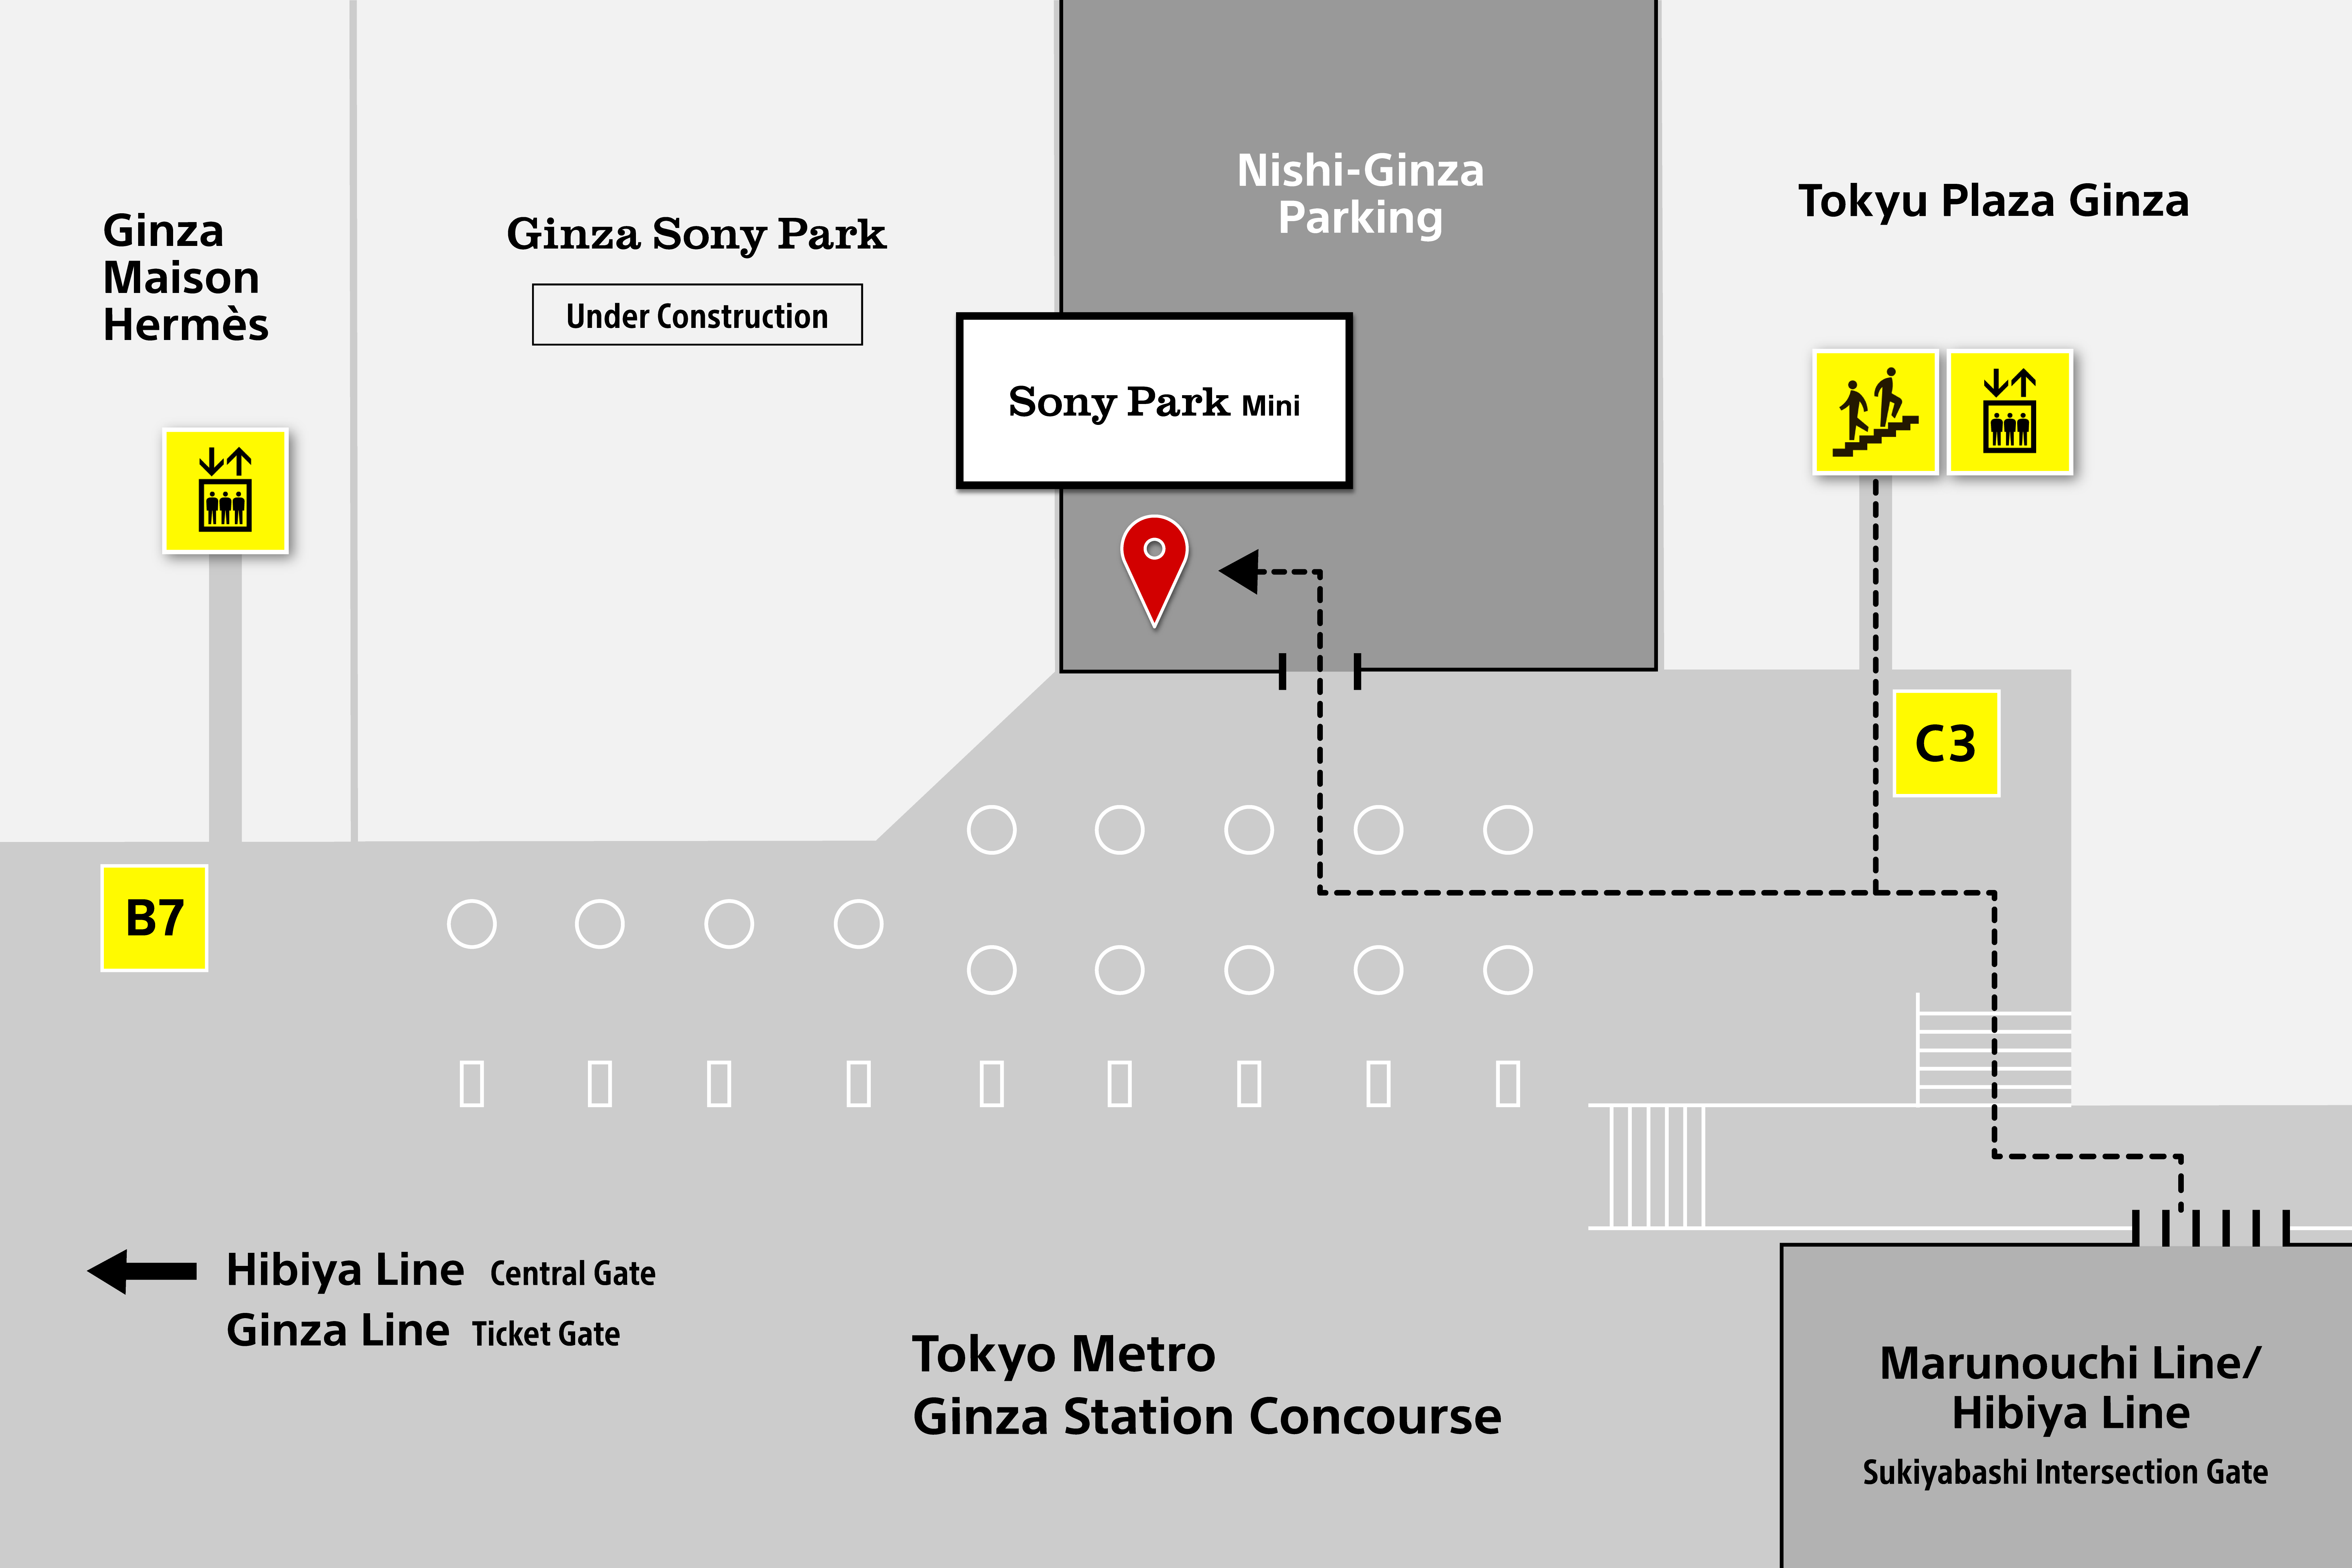 Location of Sony Park Mini and Ginza Station Exit